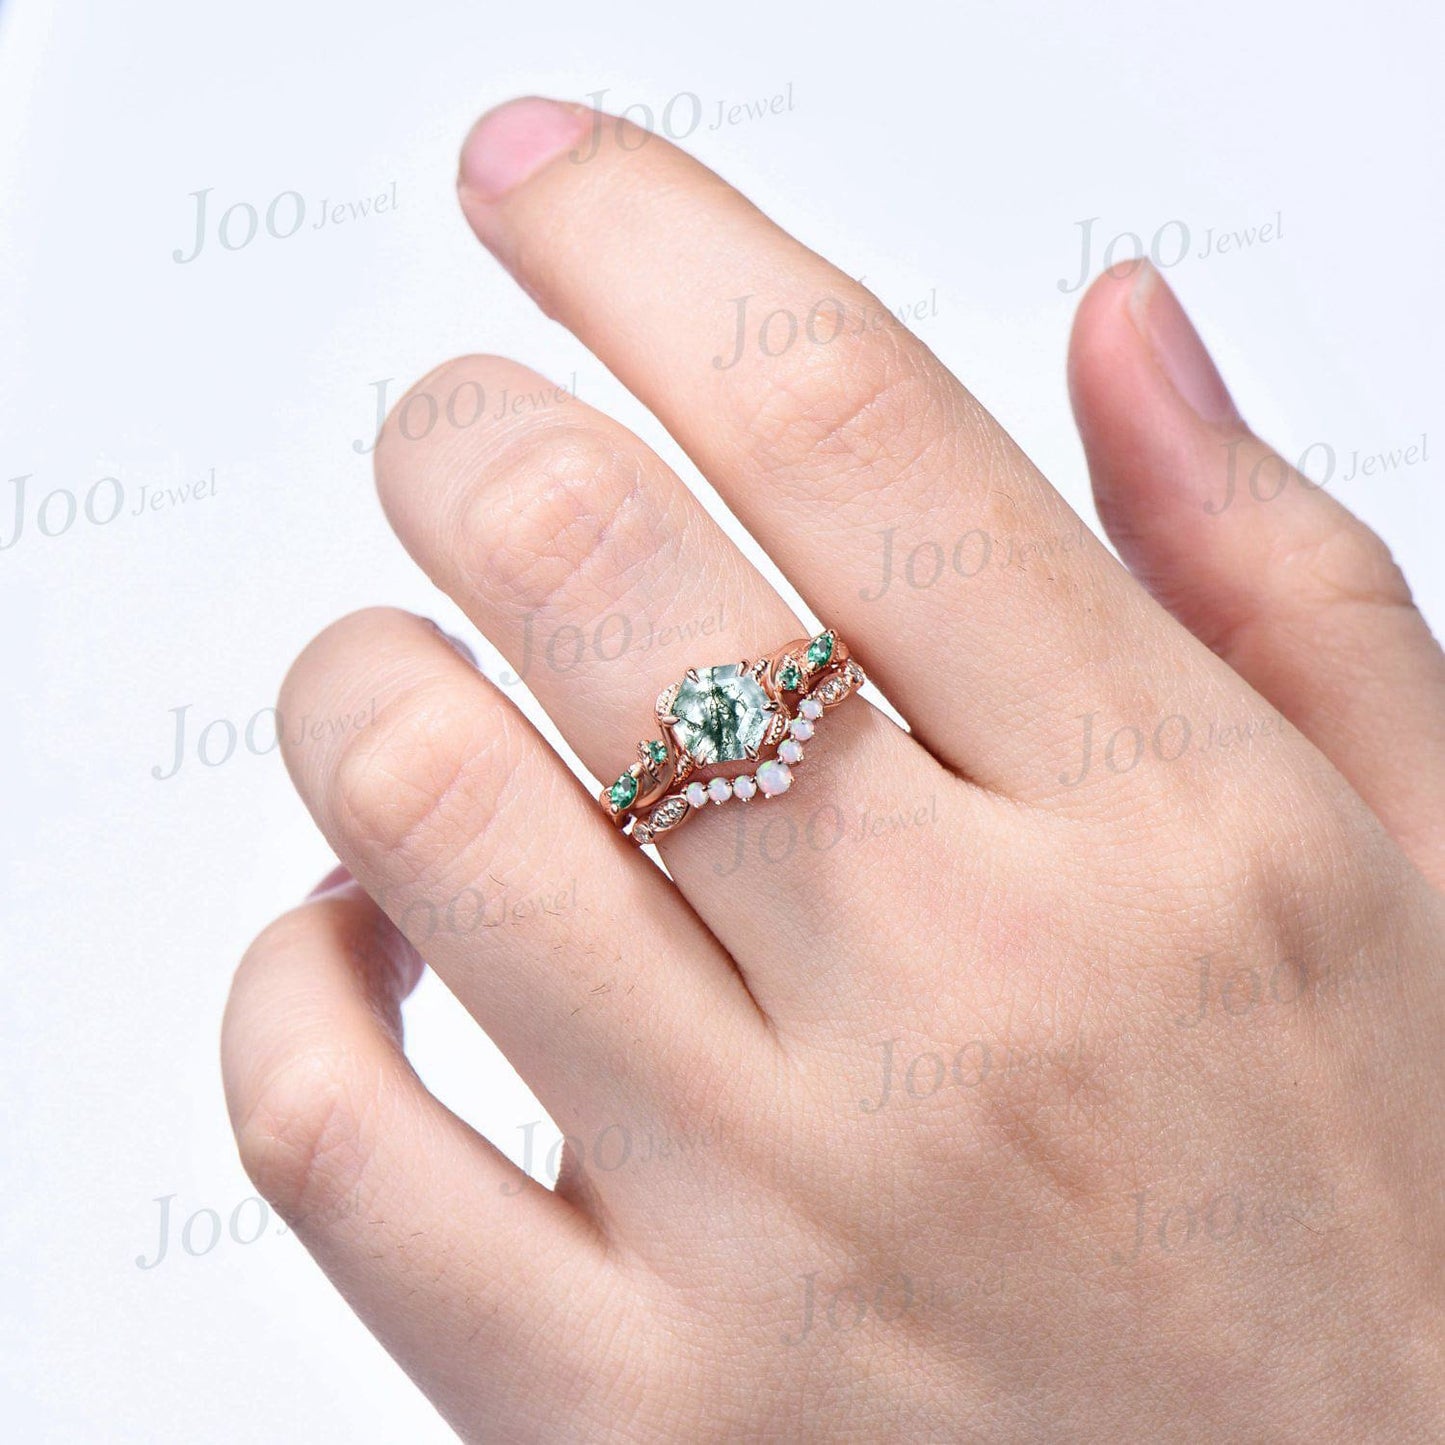 1ct Branch Leaves Moss Agate Ring 14K Rose Gold Nature Inspired Moss Agate Engagement Ring Set Emerald Opal Wedding Ring Unique Propose Gift